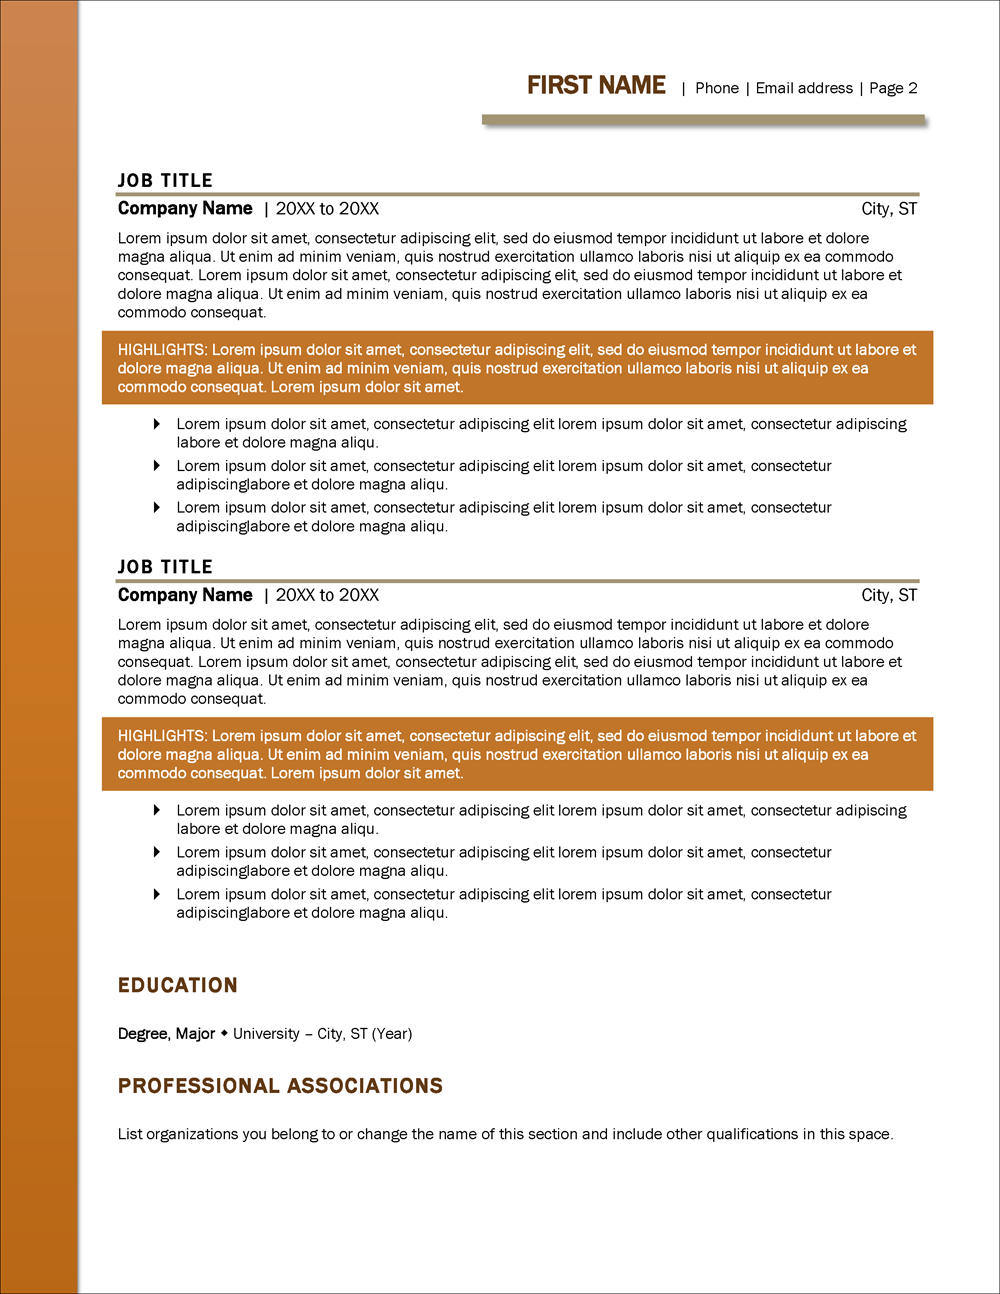 ATS-Ready Resume Template Page 2